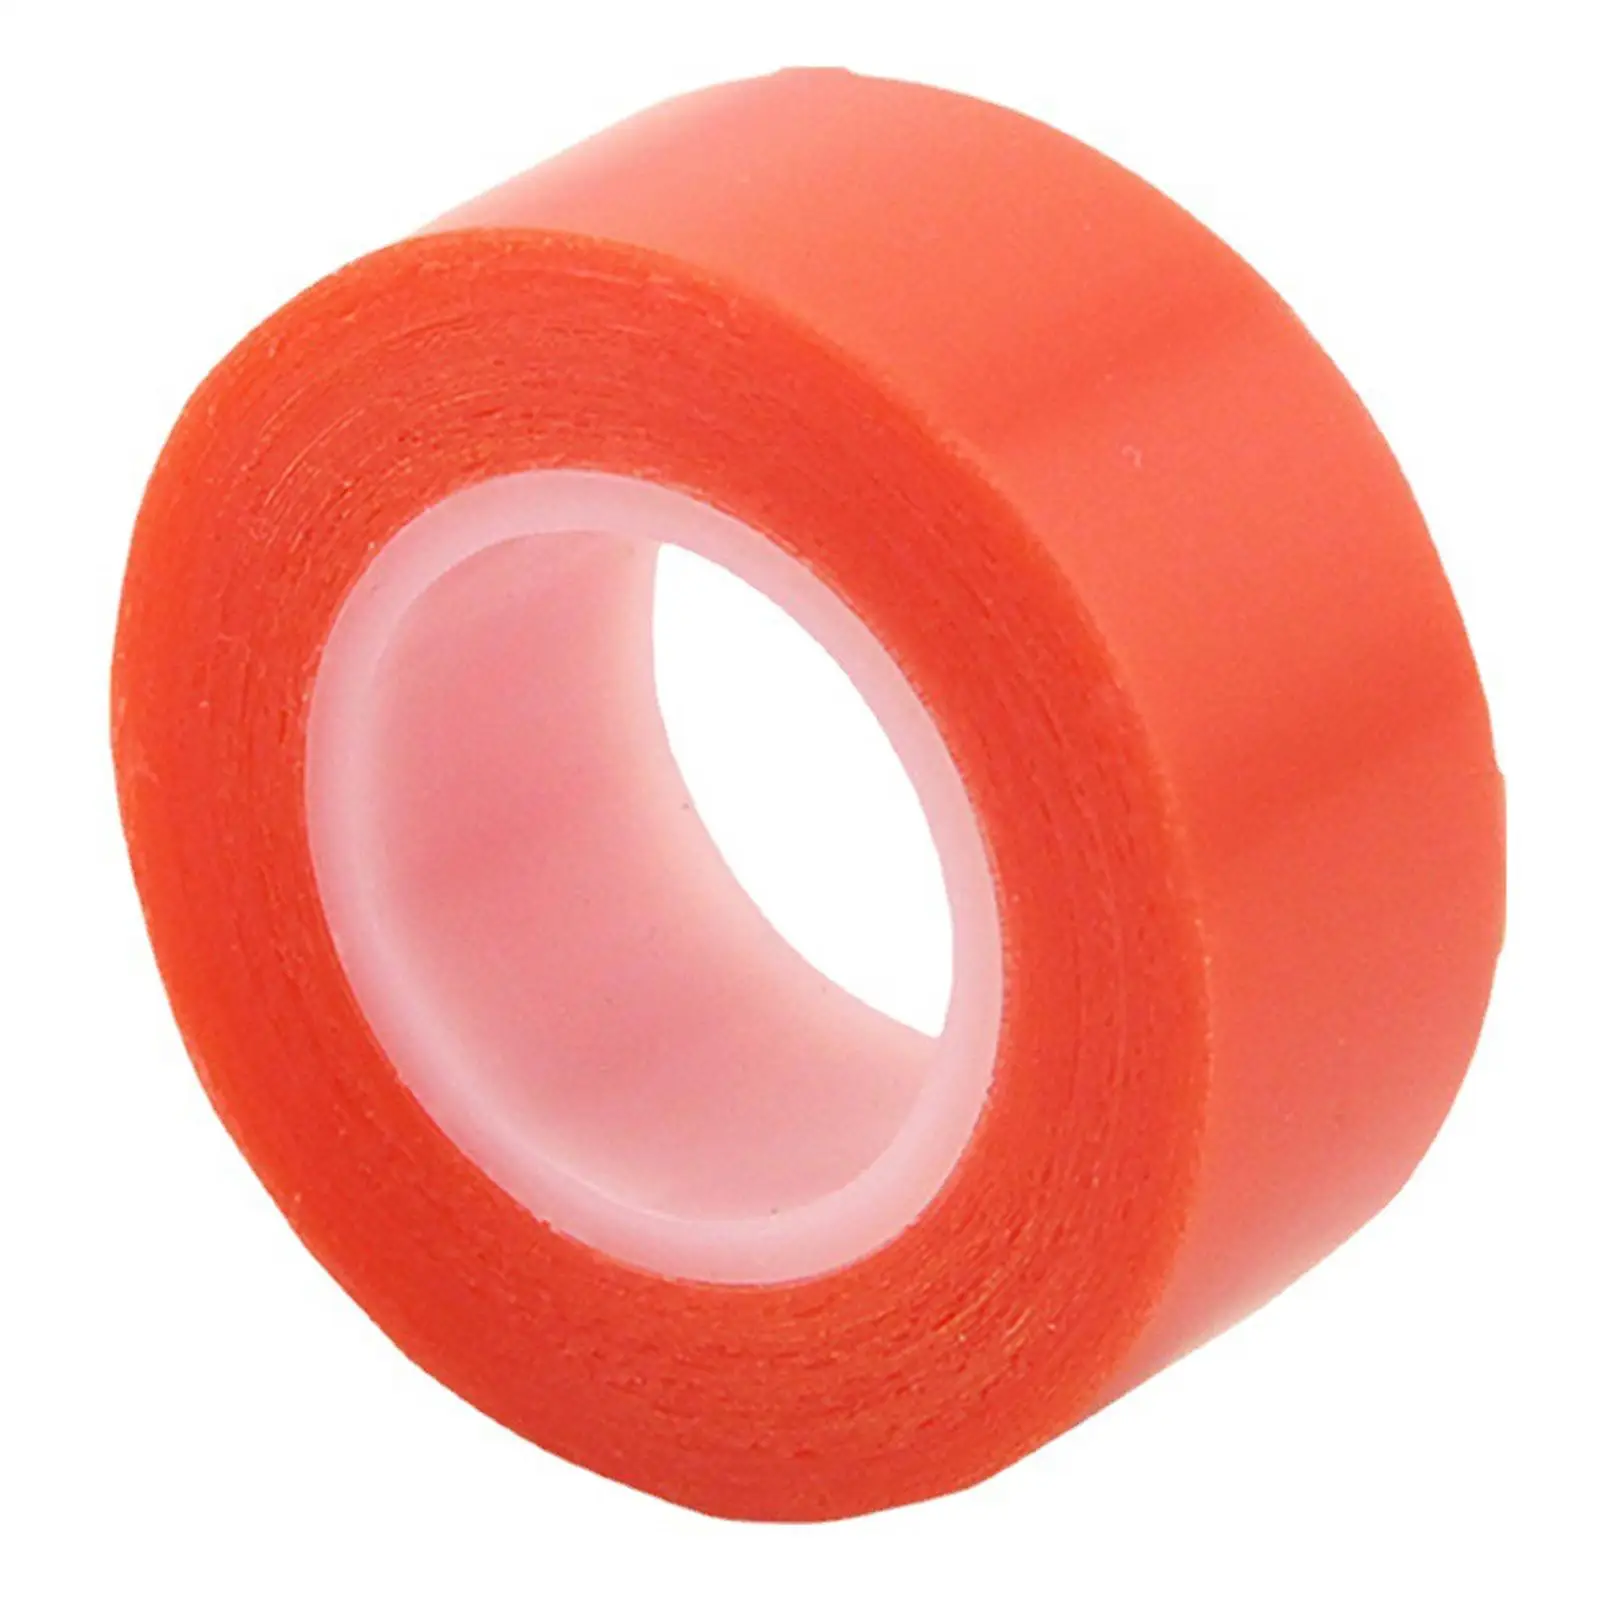 Bicycle Tubeless Rim Tape Tear Resistant Bike Tire Liner Bike Wheel Rim Tape Tube Tire Tape for Road Bikes Cycling Accessories